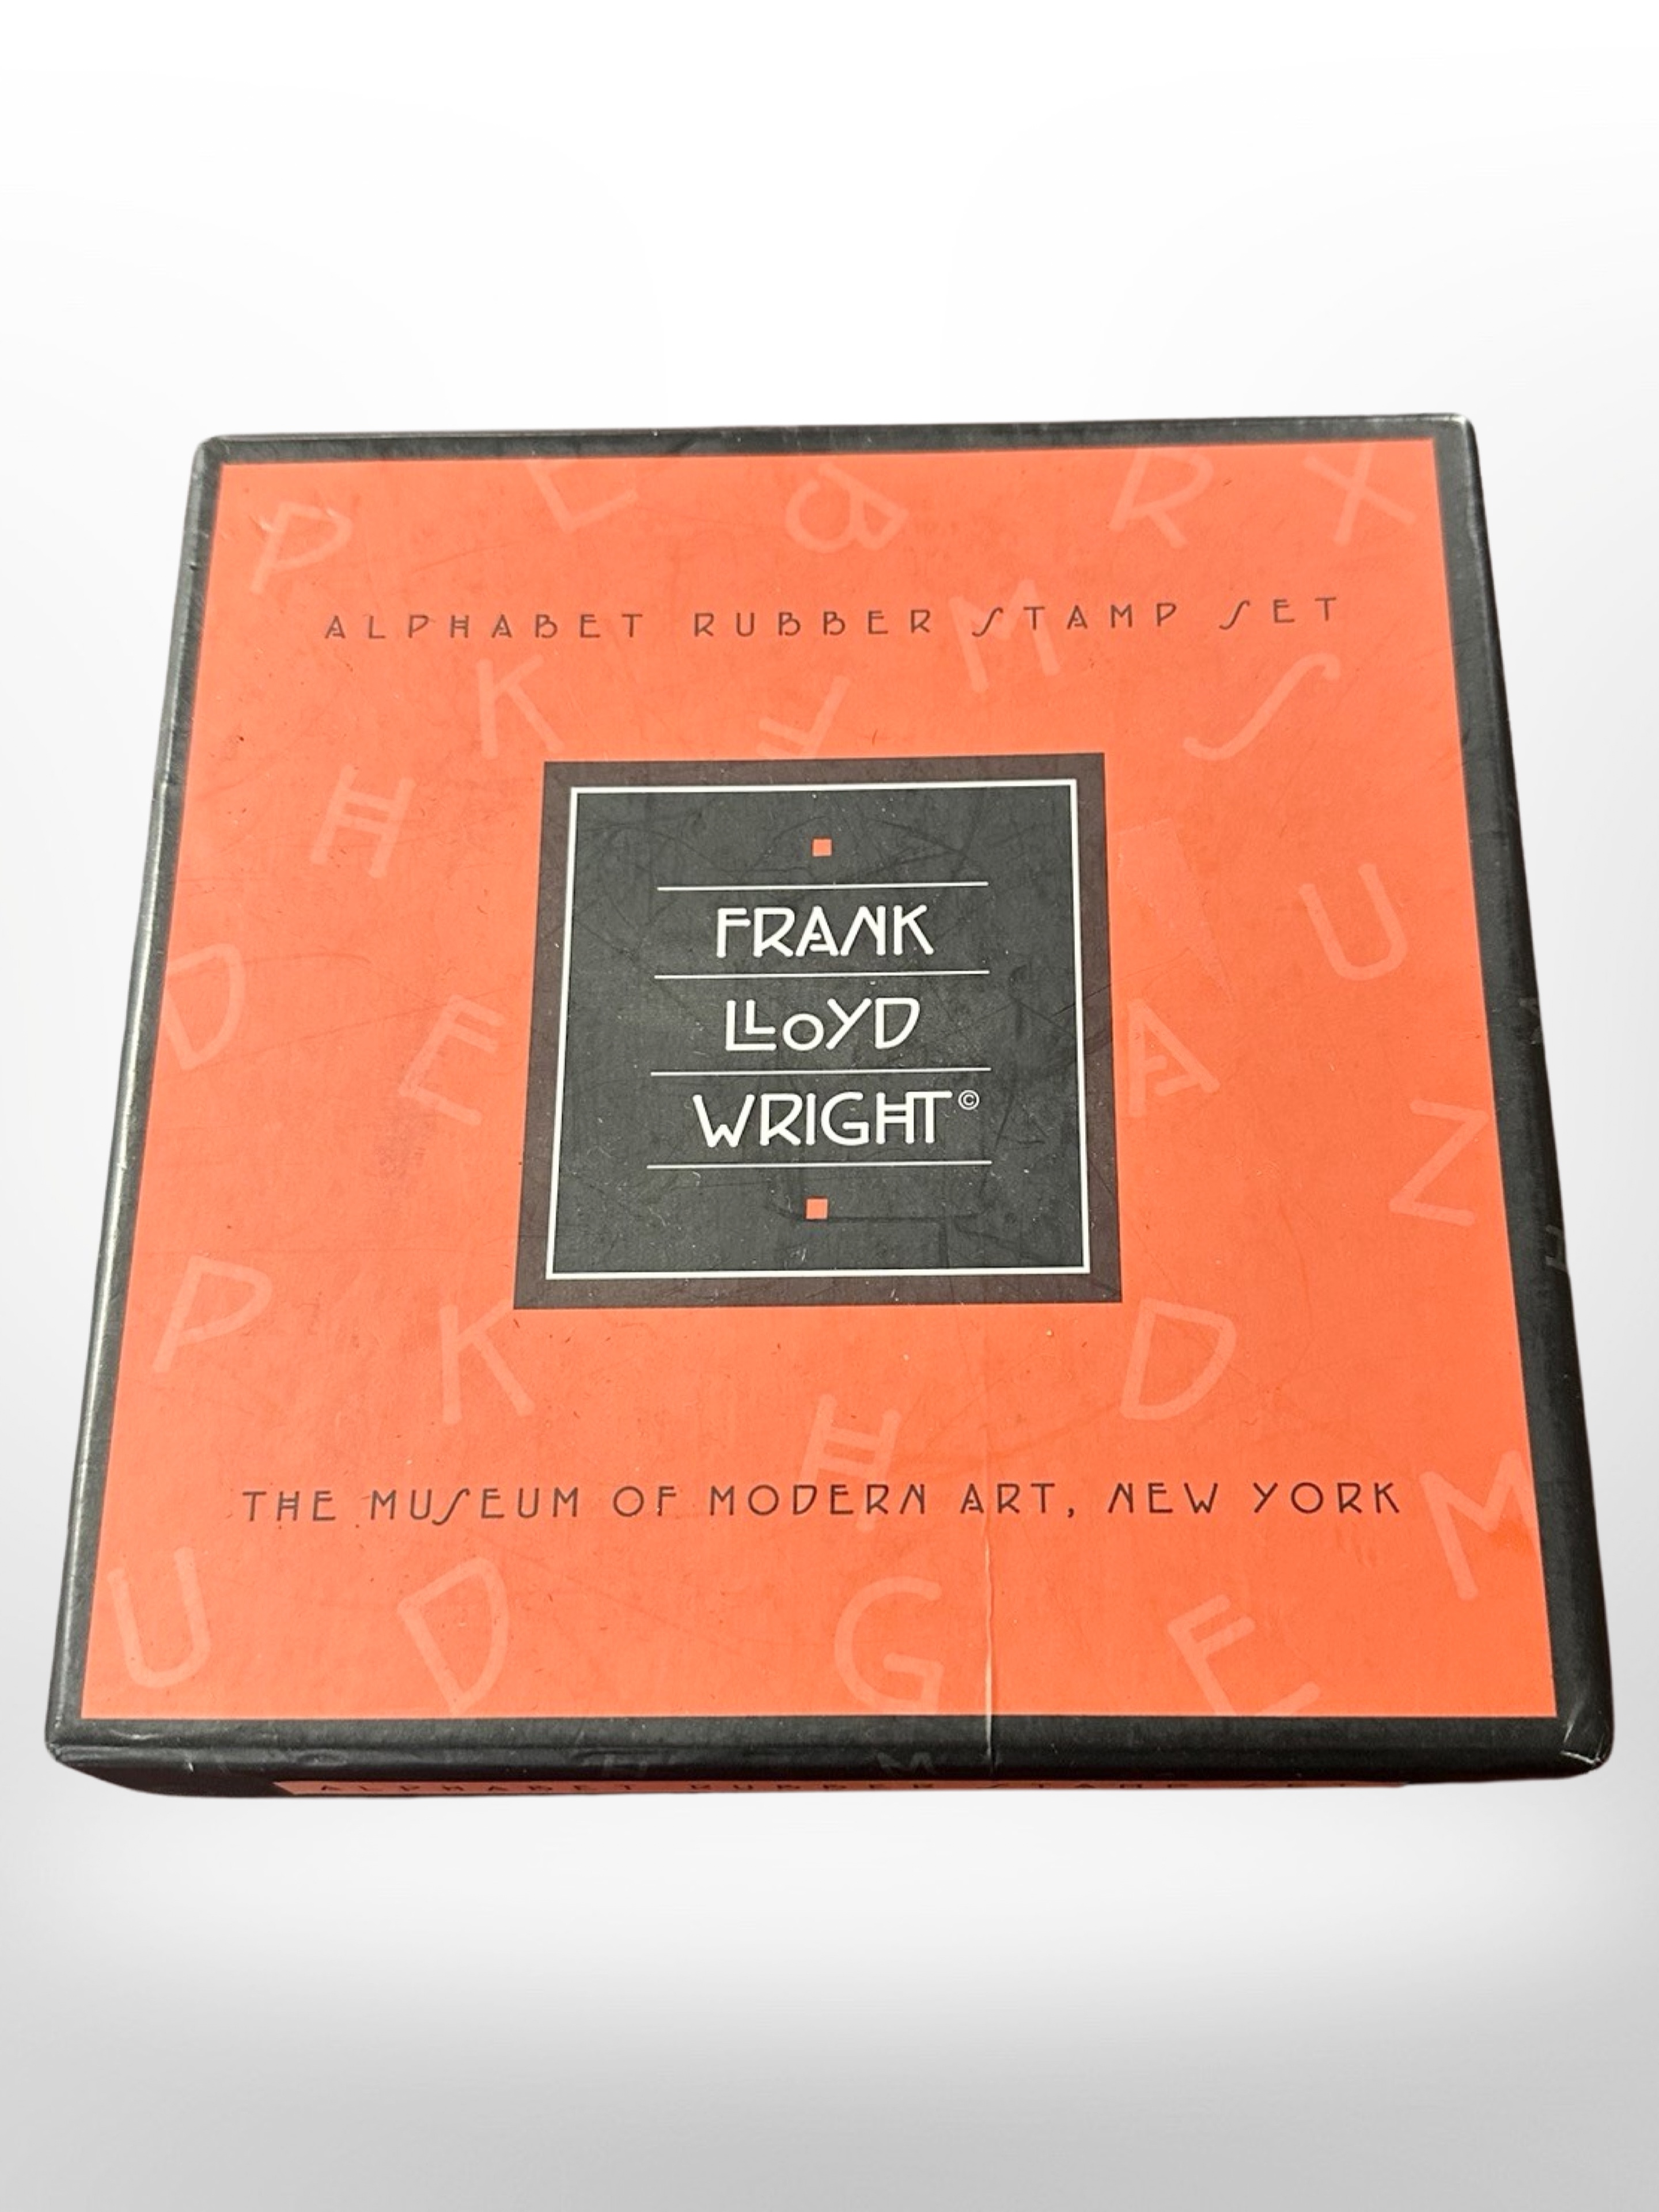 A Frank Lloyd Wright alphabet rubber stamp set from the Museum of Modern Art, New York.